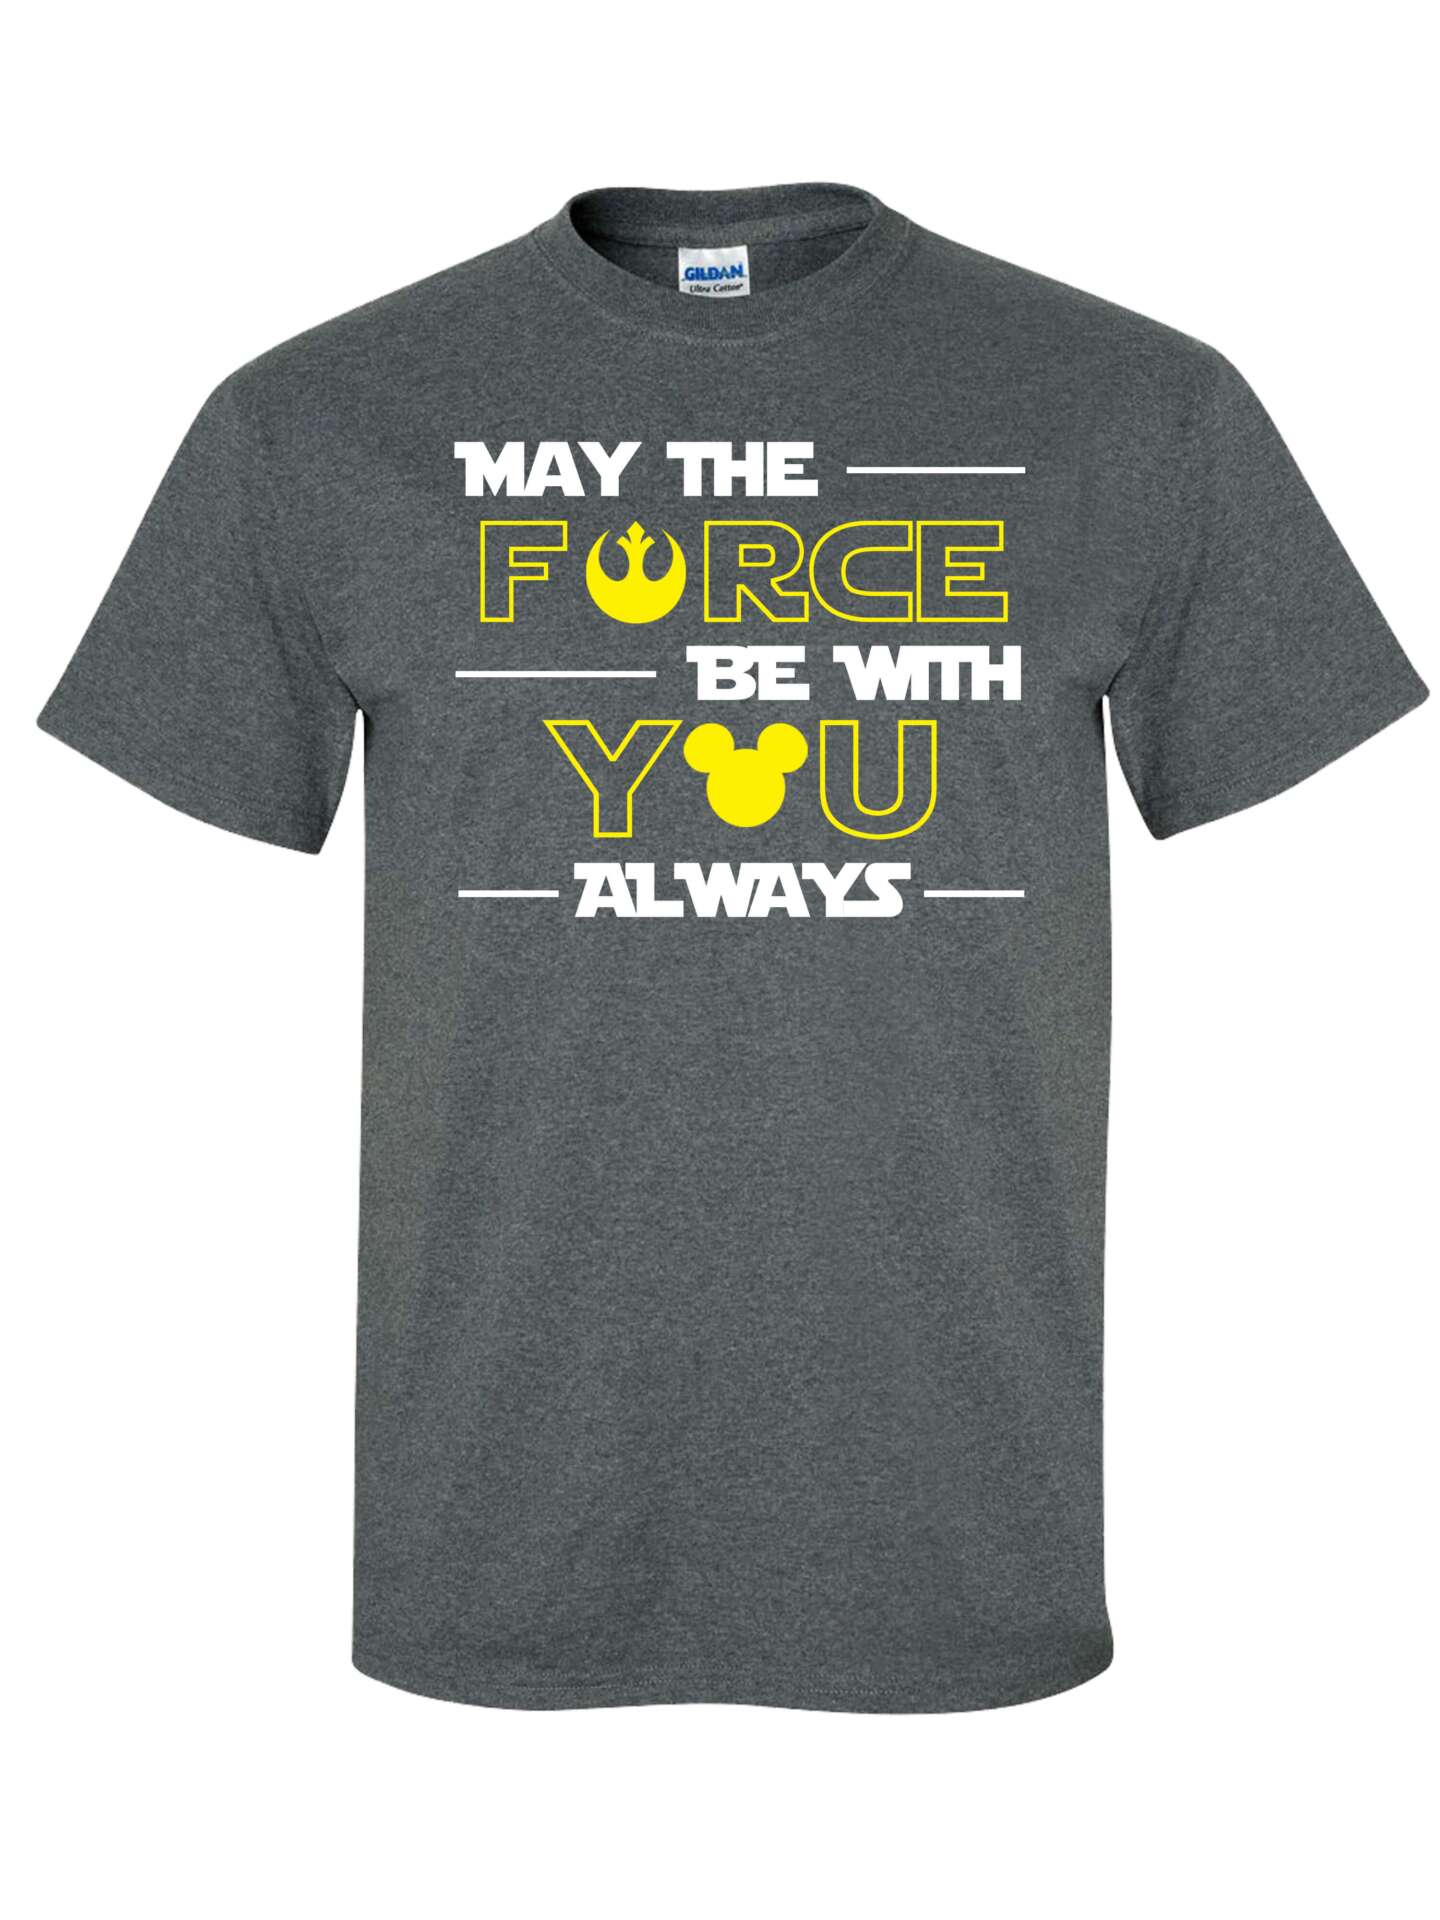 May The Force Be With You - Always - Grey T-Shirt